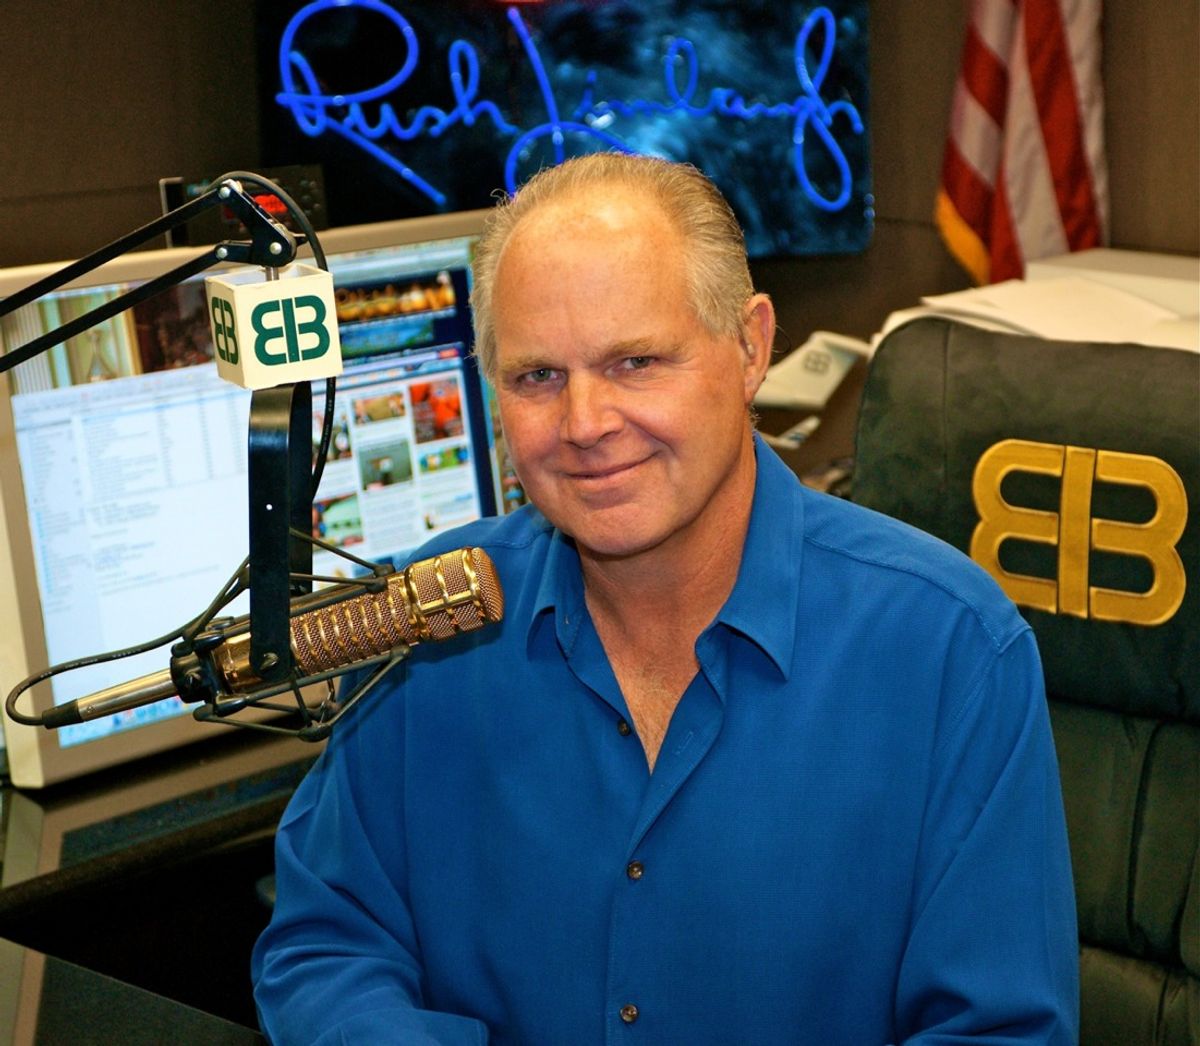 This photo provided by Rush Limbaugh shows Limbaugh in his Palm Beach, Fla. radio studio, the last week of Sept., 2009. NFL commissioner Roger Goodell says he would not tolerate "divisive" comments from an NFL owner like the ones the talk show host made about Donovan McNabb in 2003. And Colts owner Jim Irsay says he would vote to bar Limbaugh if he tries to buy the St. Louis Rams. (AP Photo/Photo courtesy of Rush Limbaugh) (Associated Press)